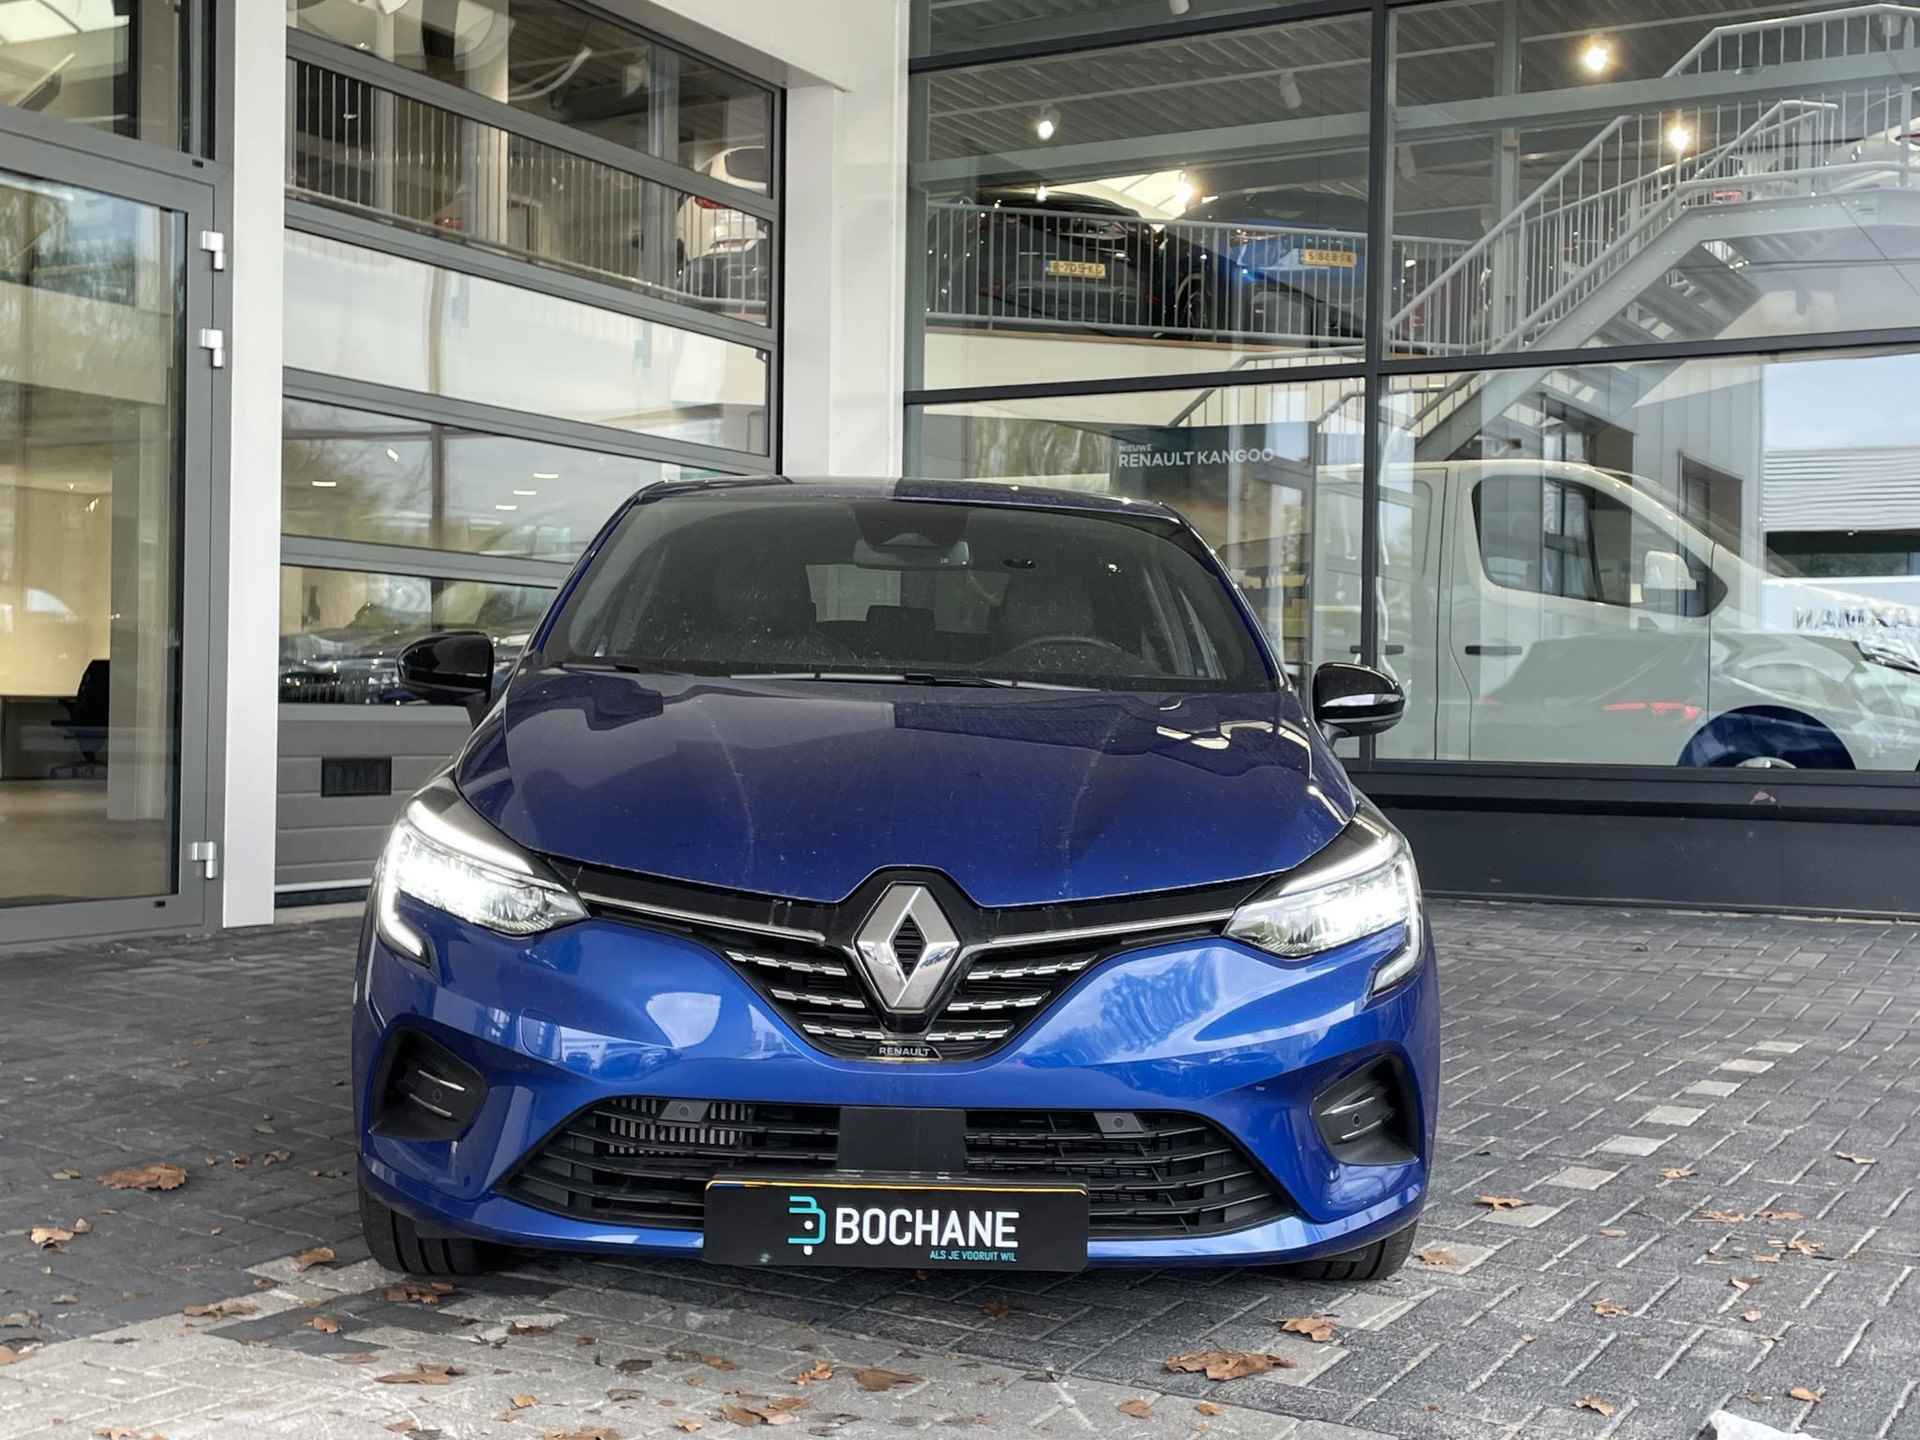 Renault Clio 1.0 TCe 90 Techno  / Cruise / Clima / Full LED / Navigatie / Camera / PDC  / Apple Carplay of Android Auto - 4/27